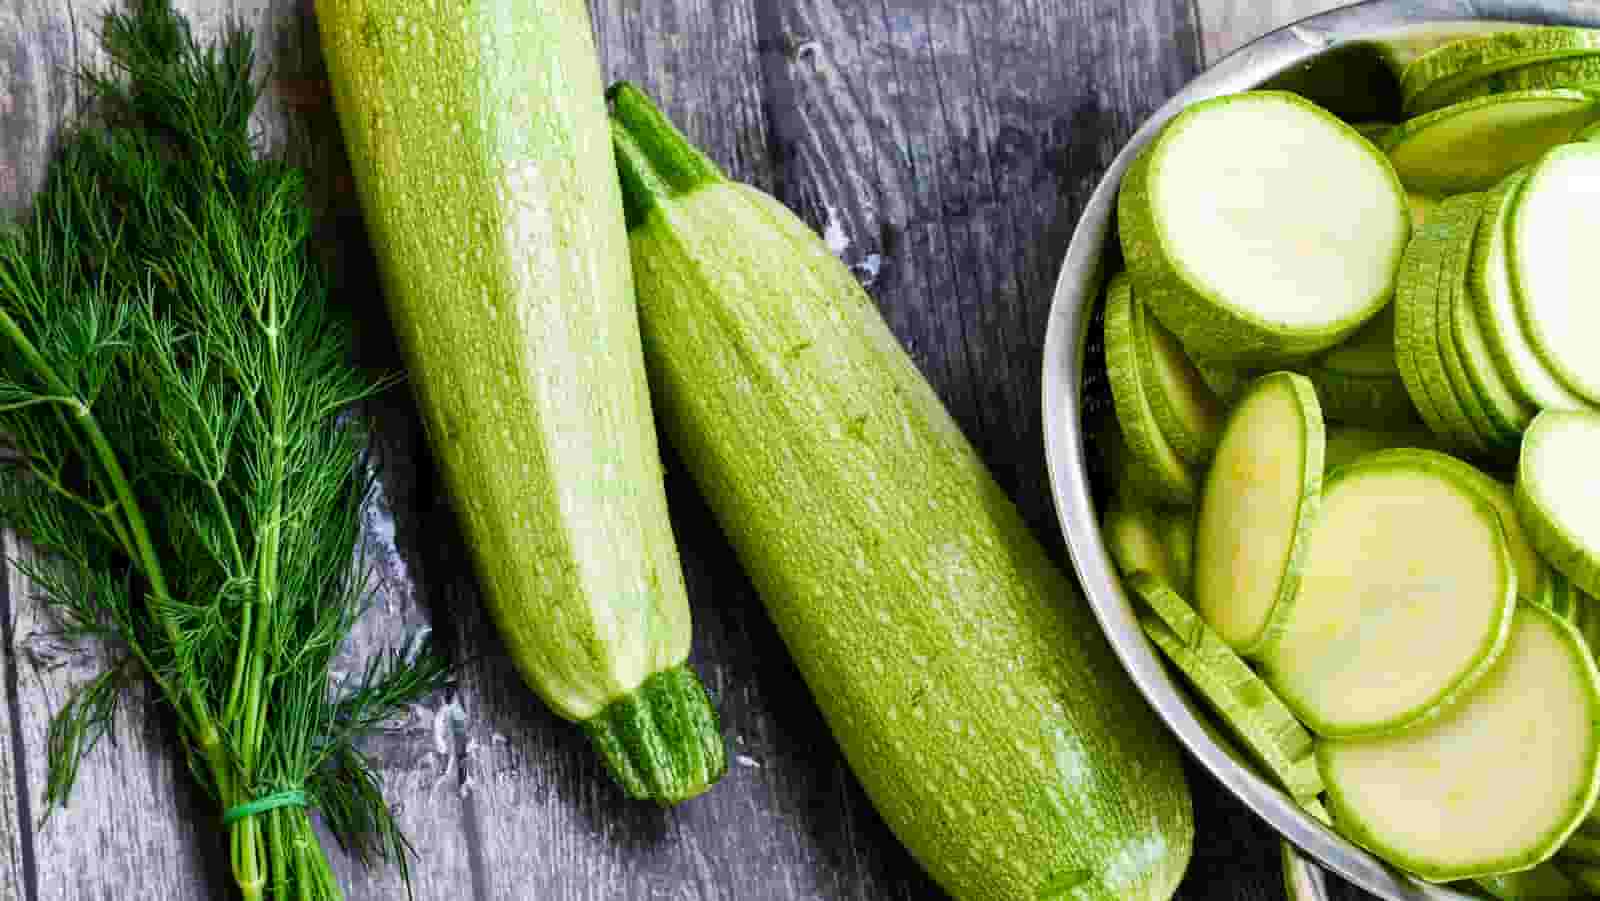 About the qualification of zucchini